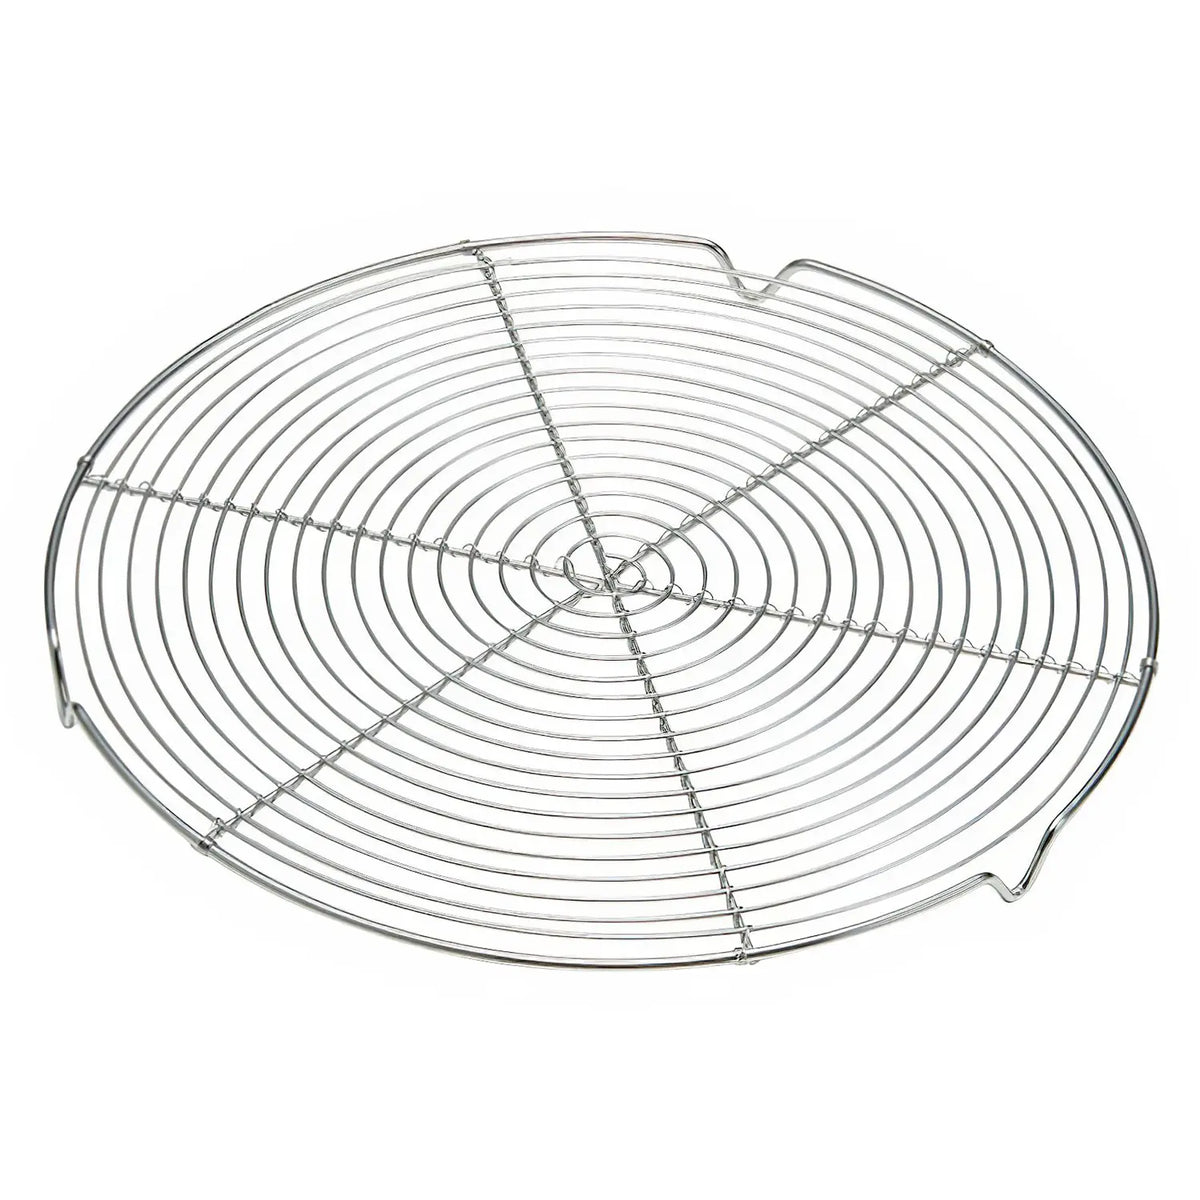 TIGERCROWN Cake Land Stainless Steel Round Cake Cooling Rack with Feet